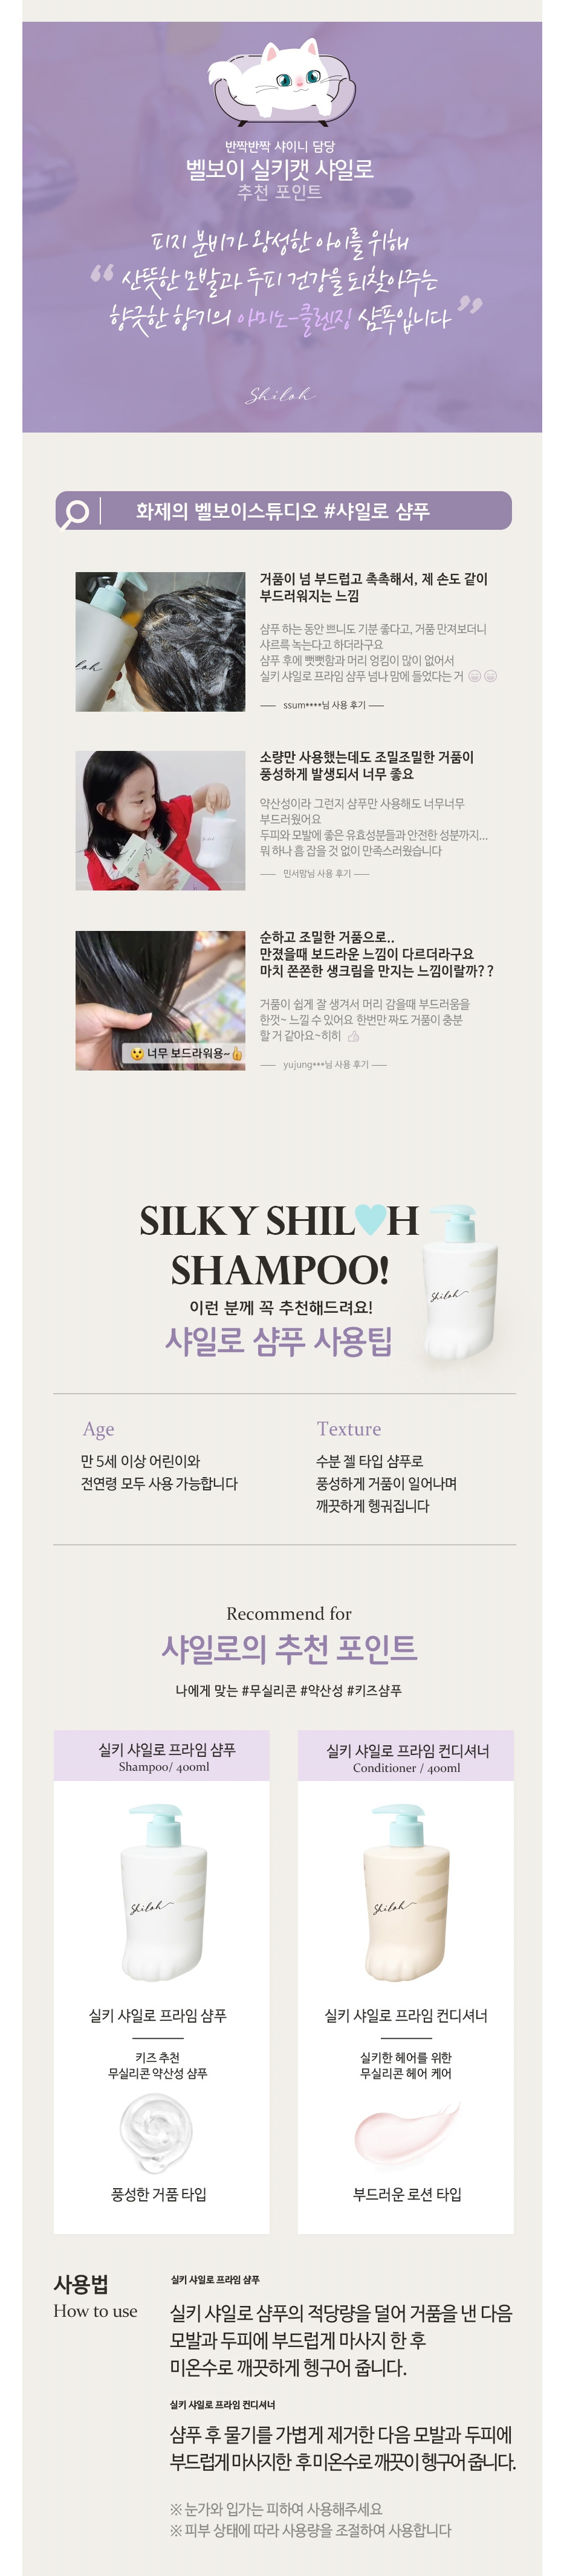 Cosmetic product image-S1L3